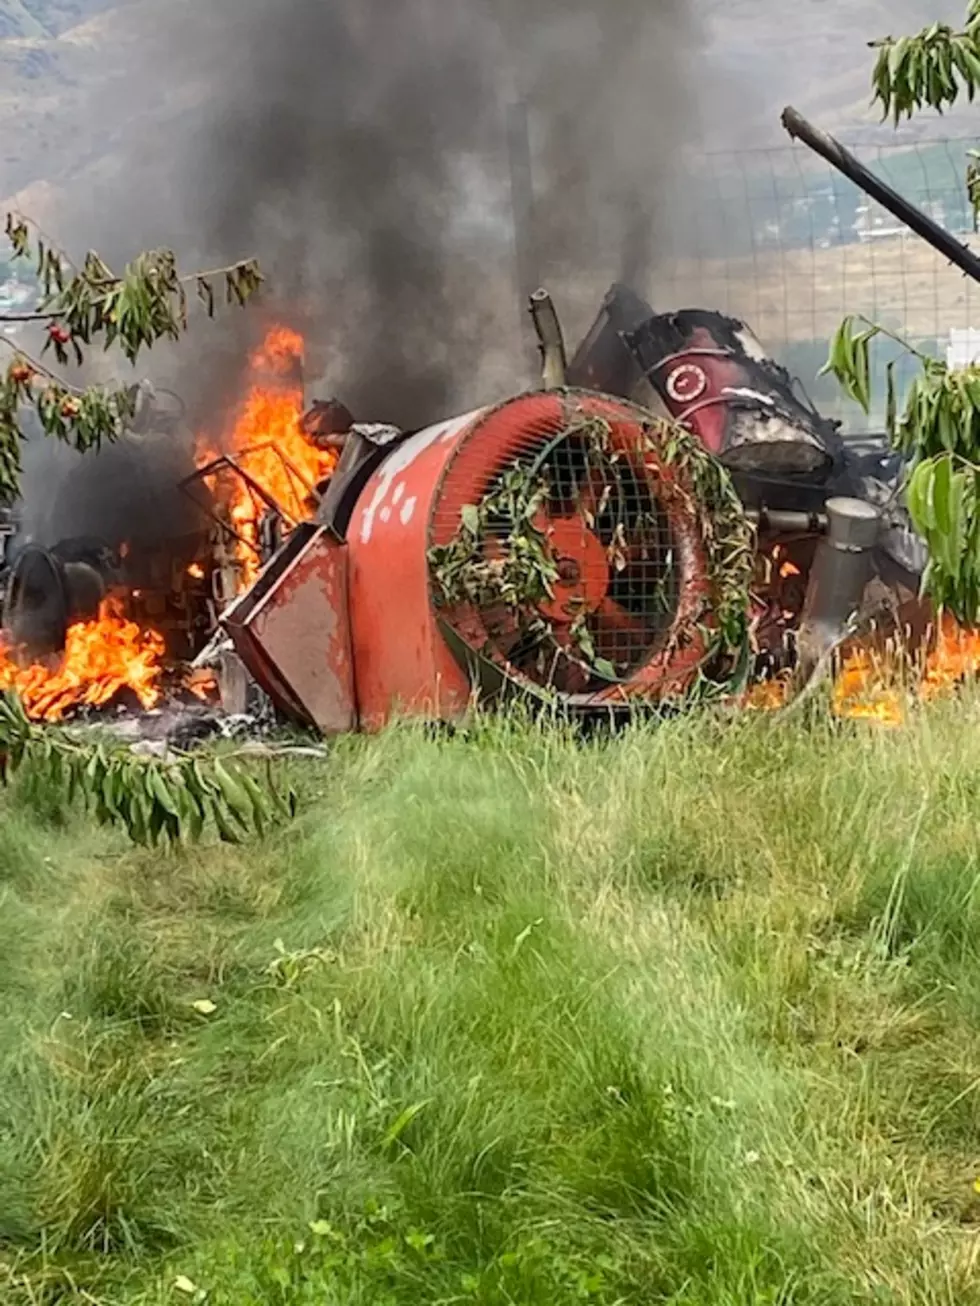 BREAKING: Helicopter Crash Near Orondo Causes Massive Power Outage for Douglas County